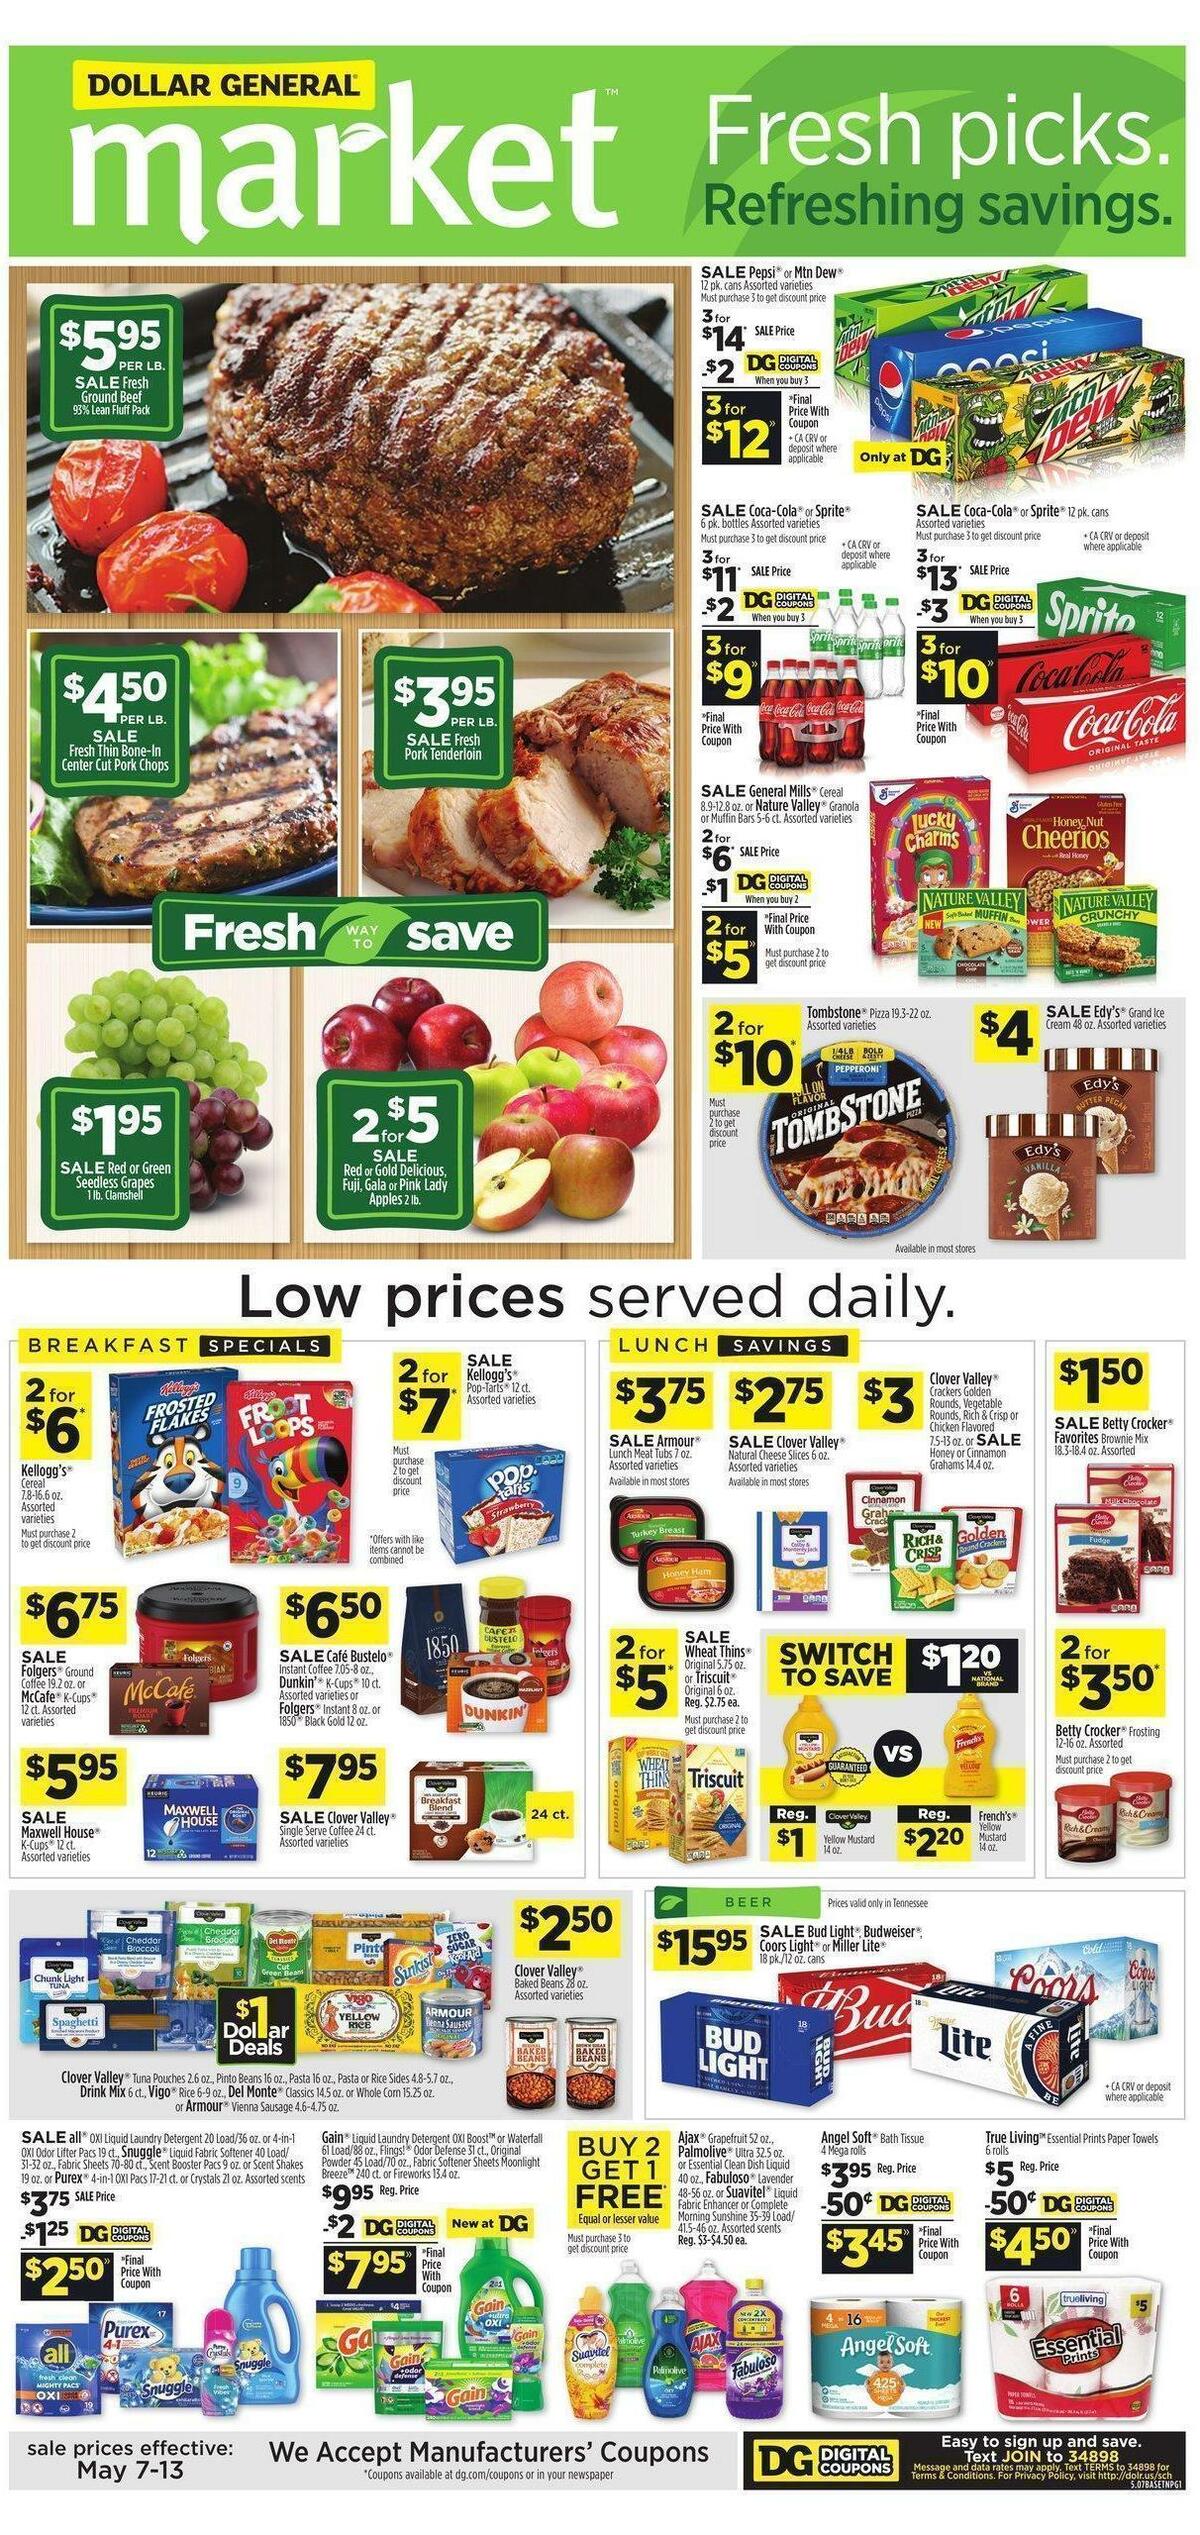 Dollar General Market Weekly Ad from May 7